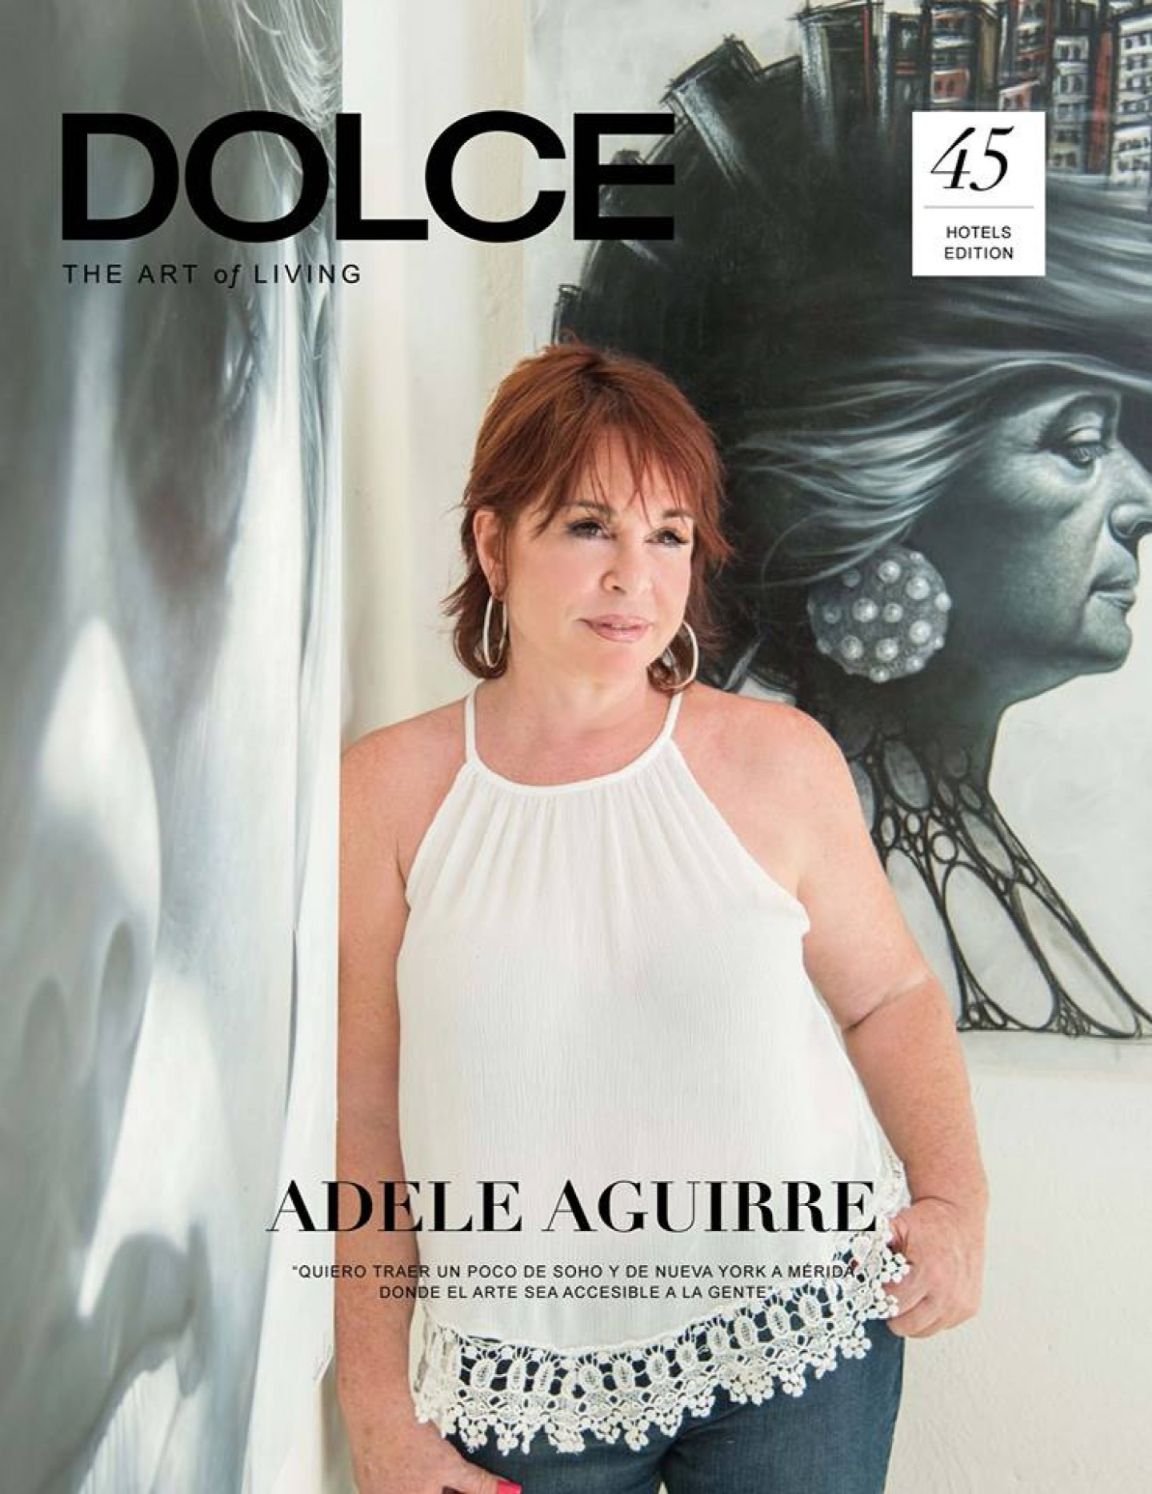 dolce 45